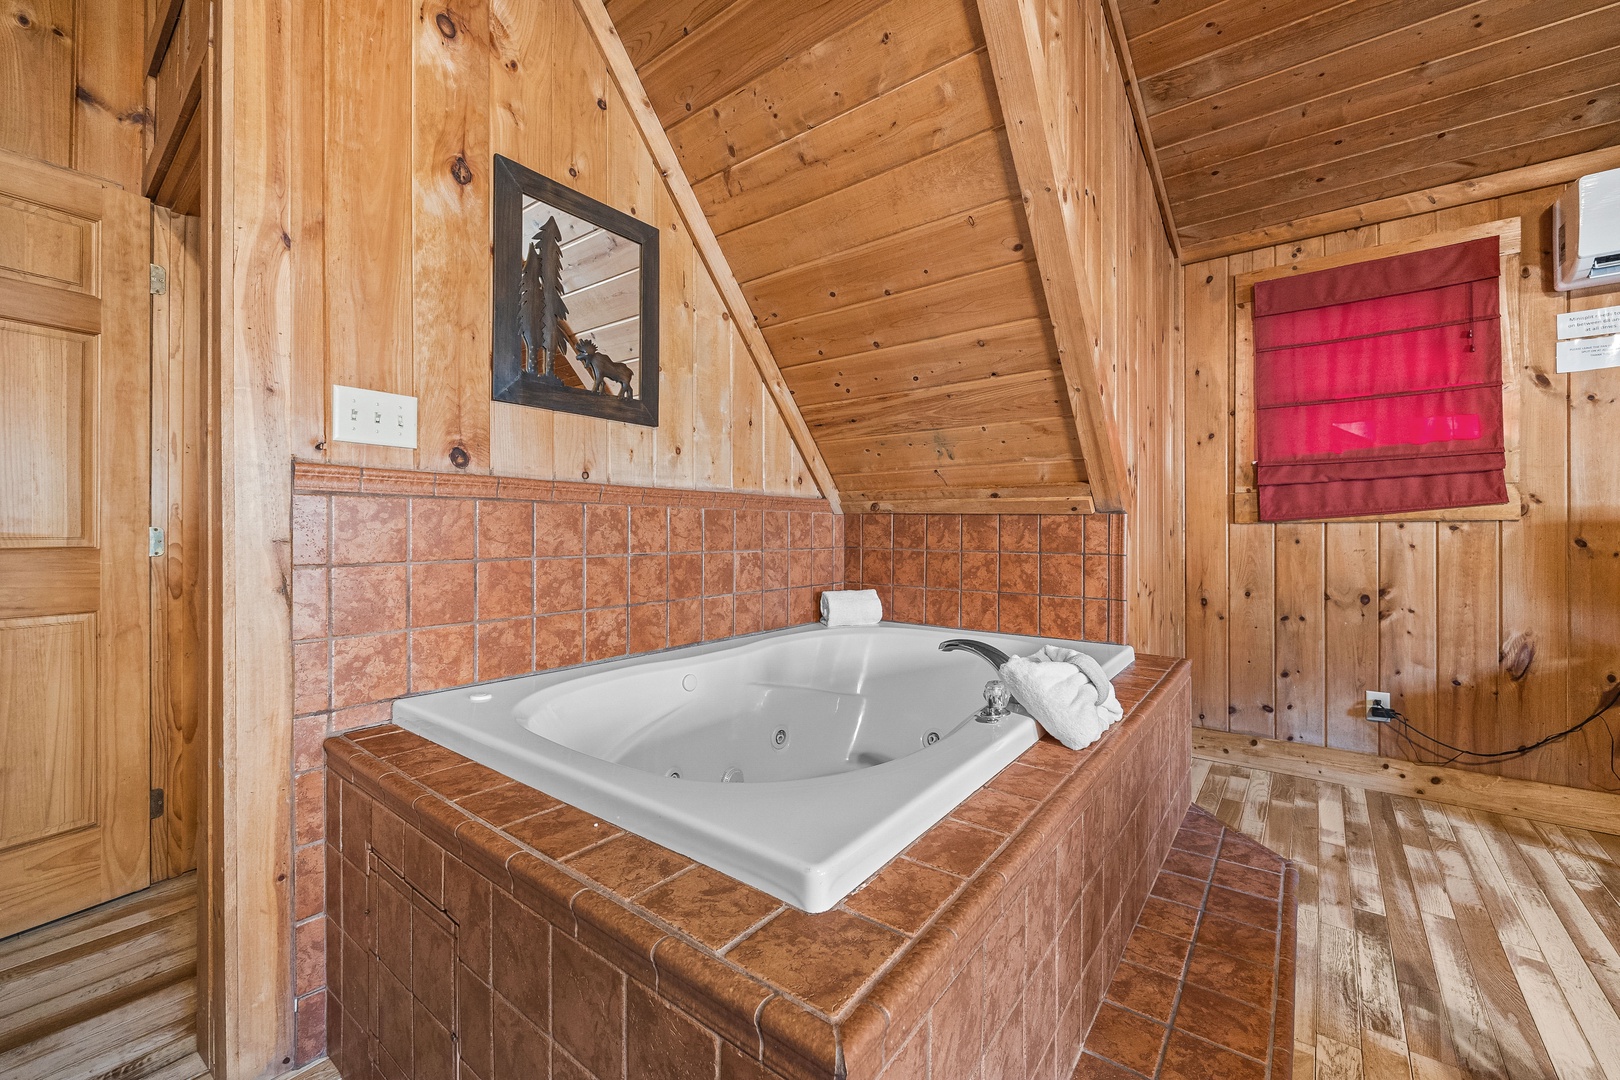 Jacuzzi in a bedroom at A Beary Nice Cabin, a 2 bedroom cabin rental located in Pigeon Forge